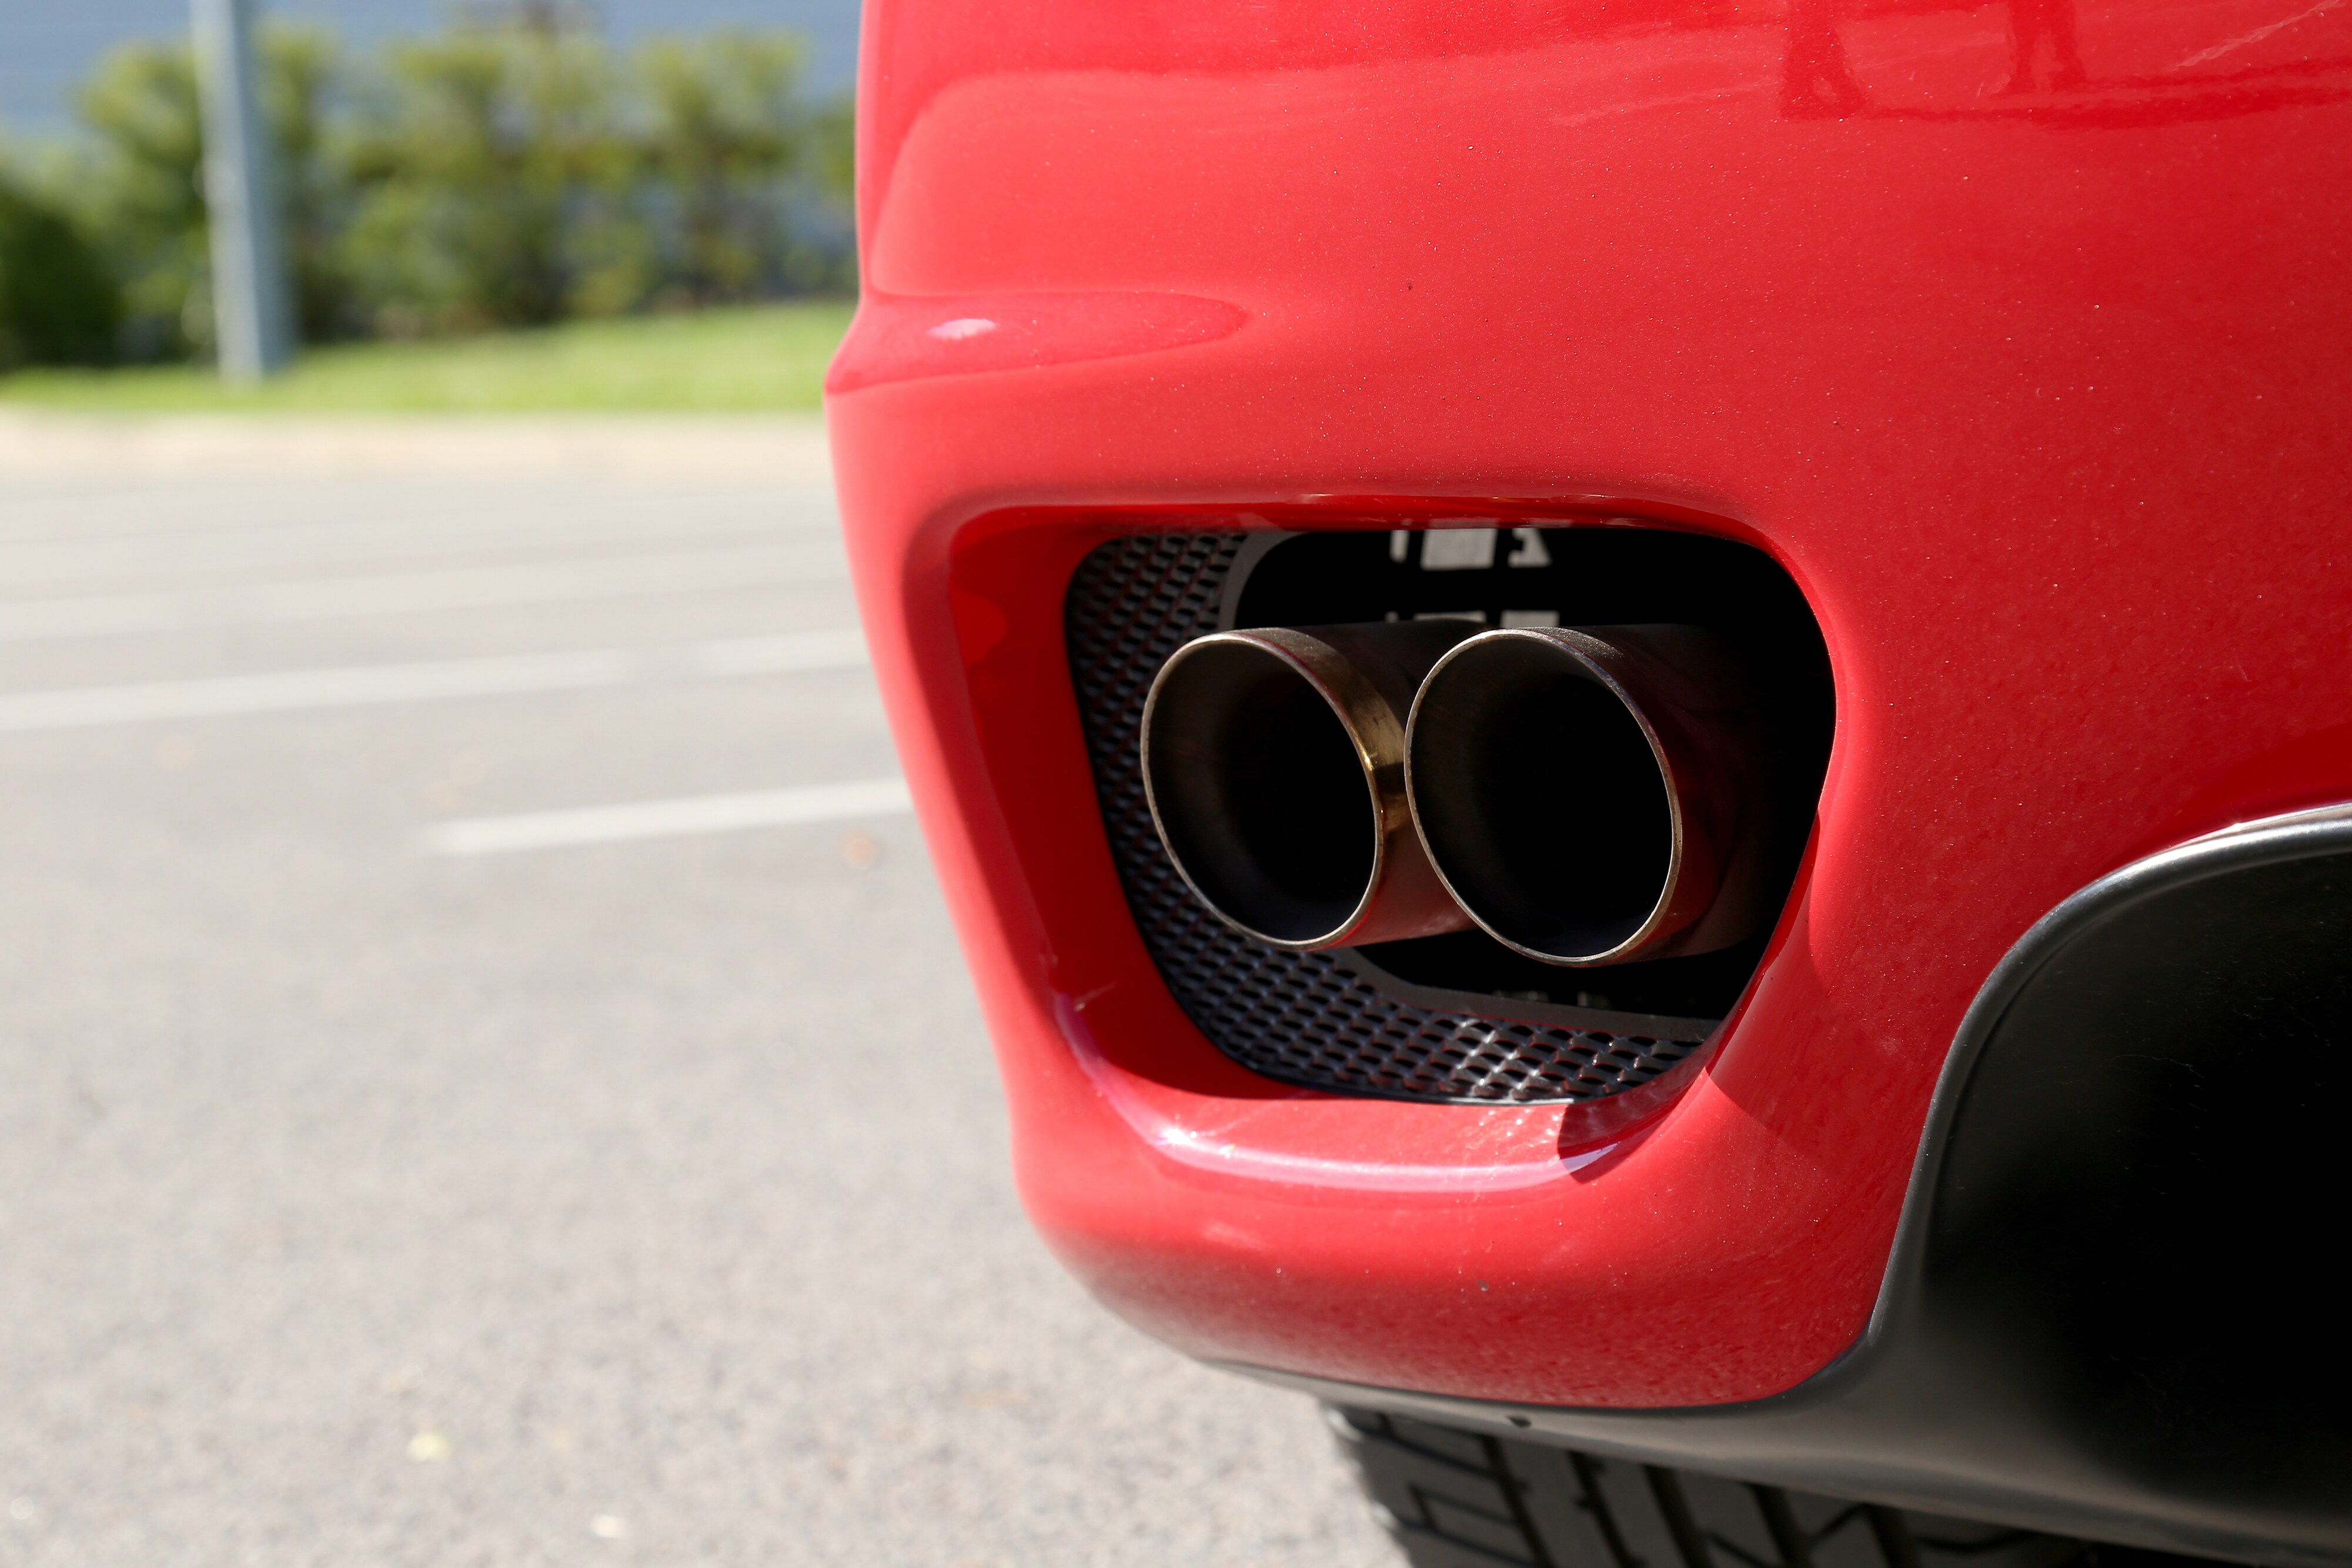 What you can get to personalize your vehicle at Boch Honda, Boch Toyota, Boch Nissan, Boch Hyundai, Boch Chevrolet, Genesis of Norwood, Boch Toyota South, Boch Honda West, Boch Nissan South, & Boch New to You in Massachusetts | Closeup of exhaust on red vehicle